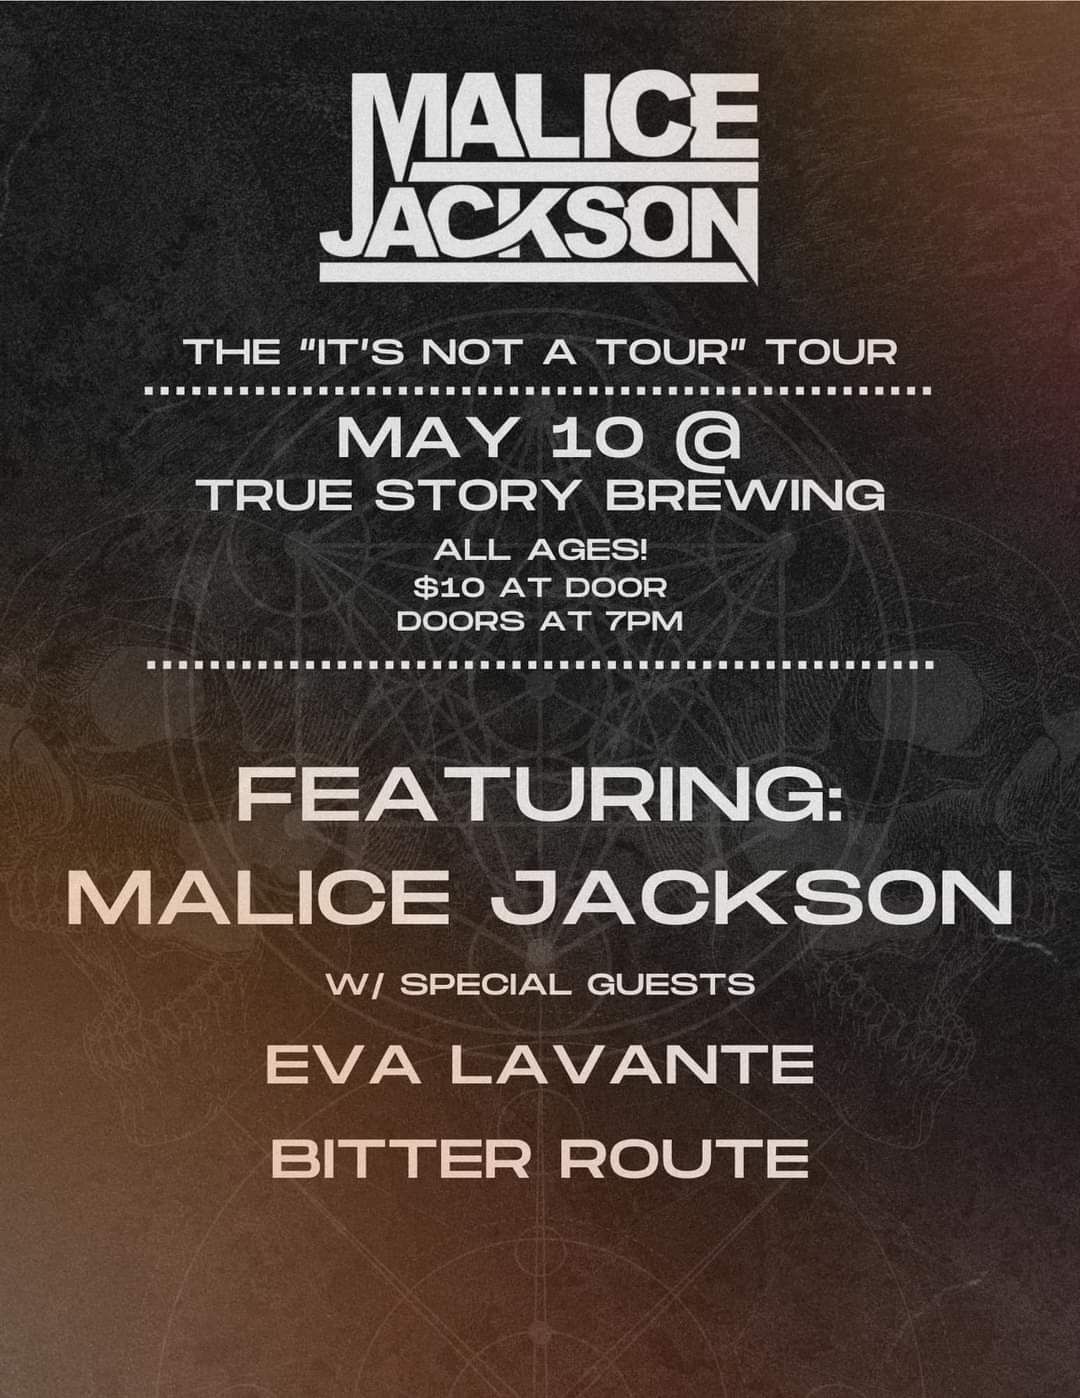 Malice Jackson with Eva Lavante and Bitter Route 